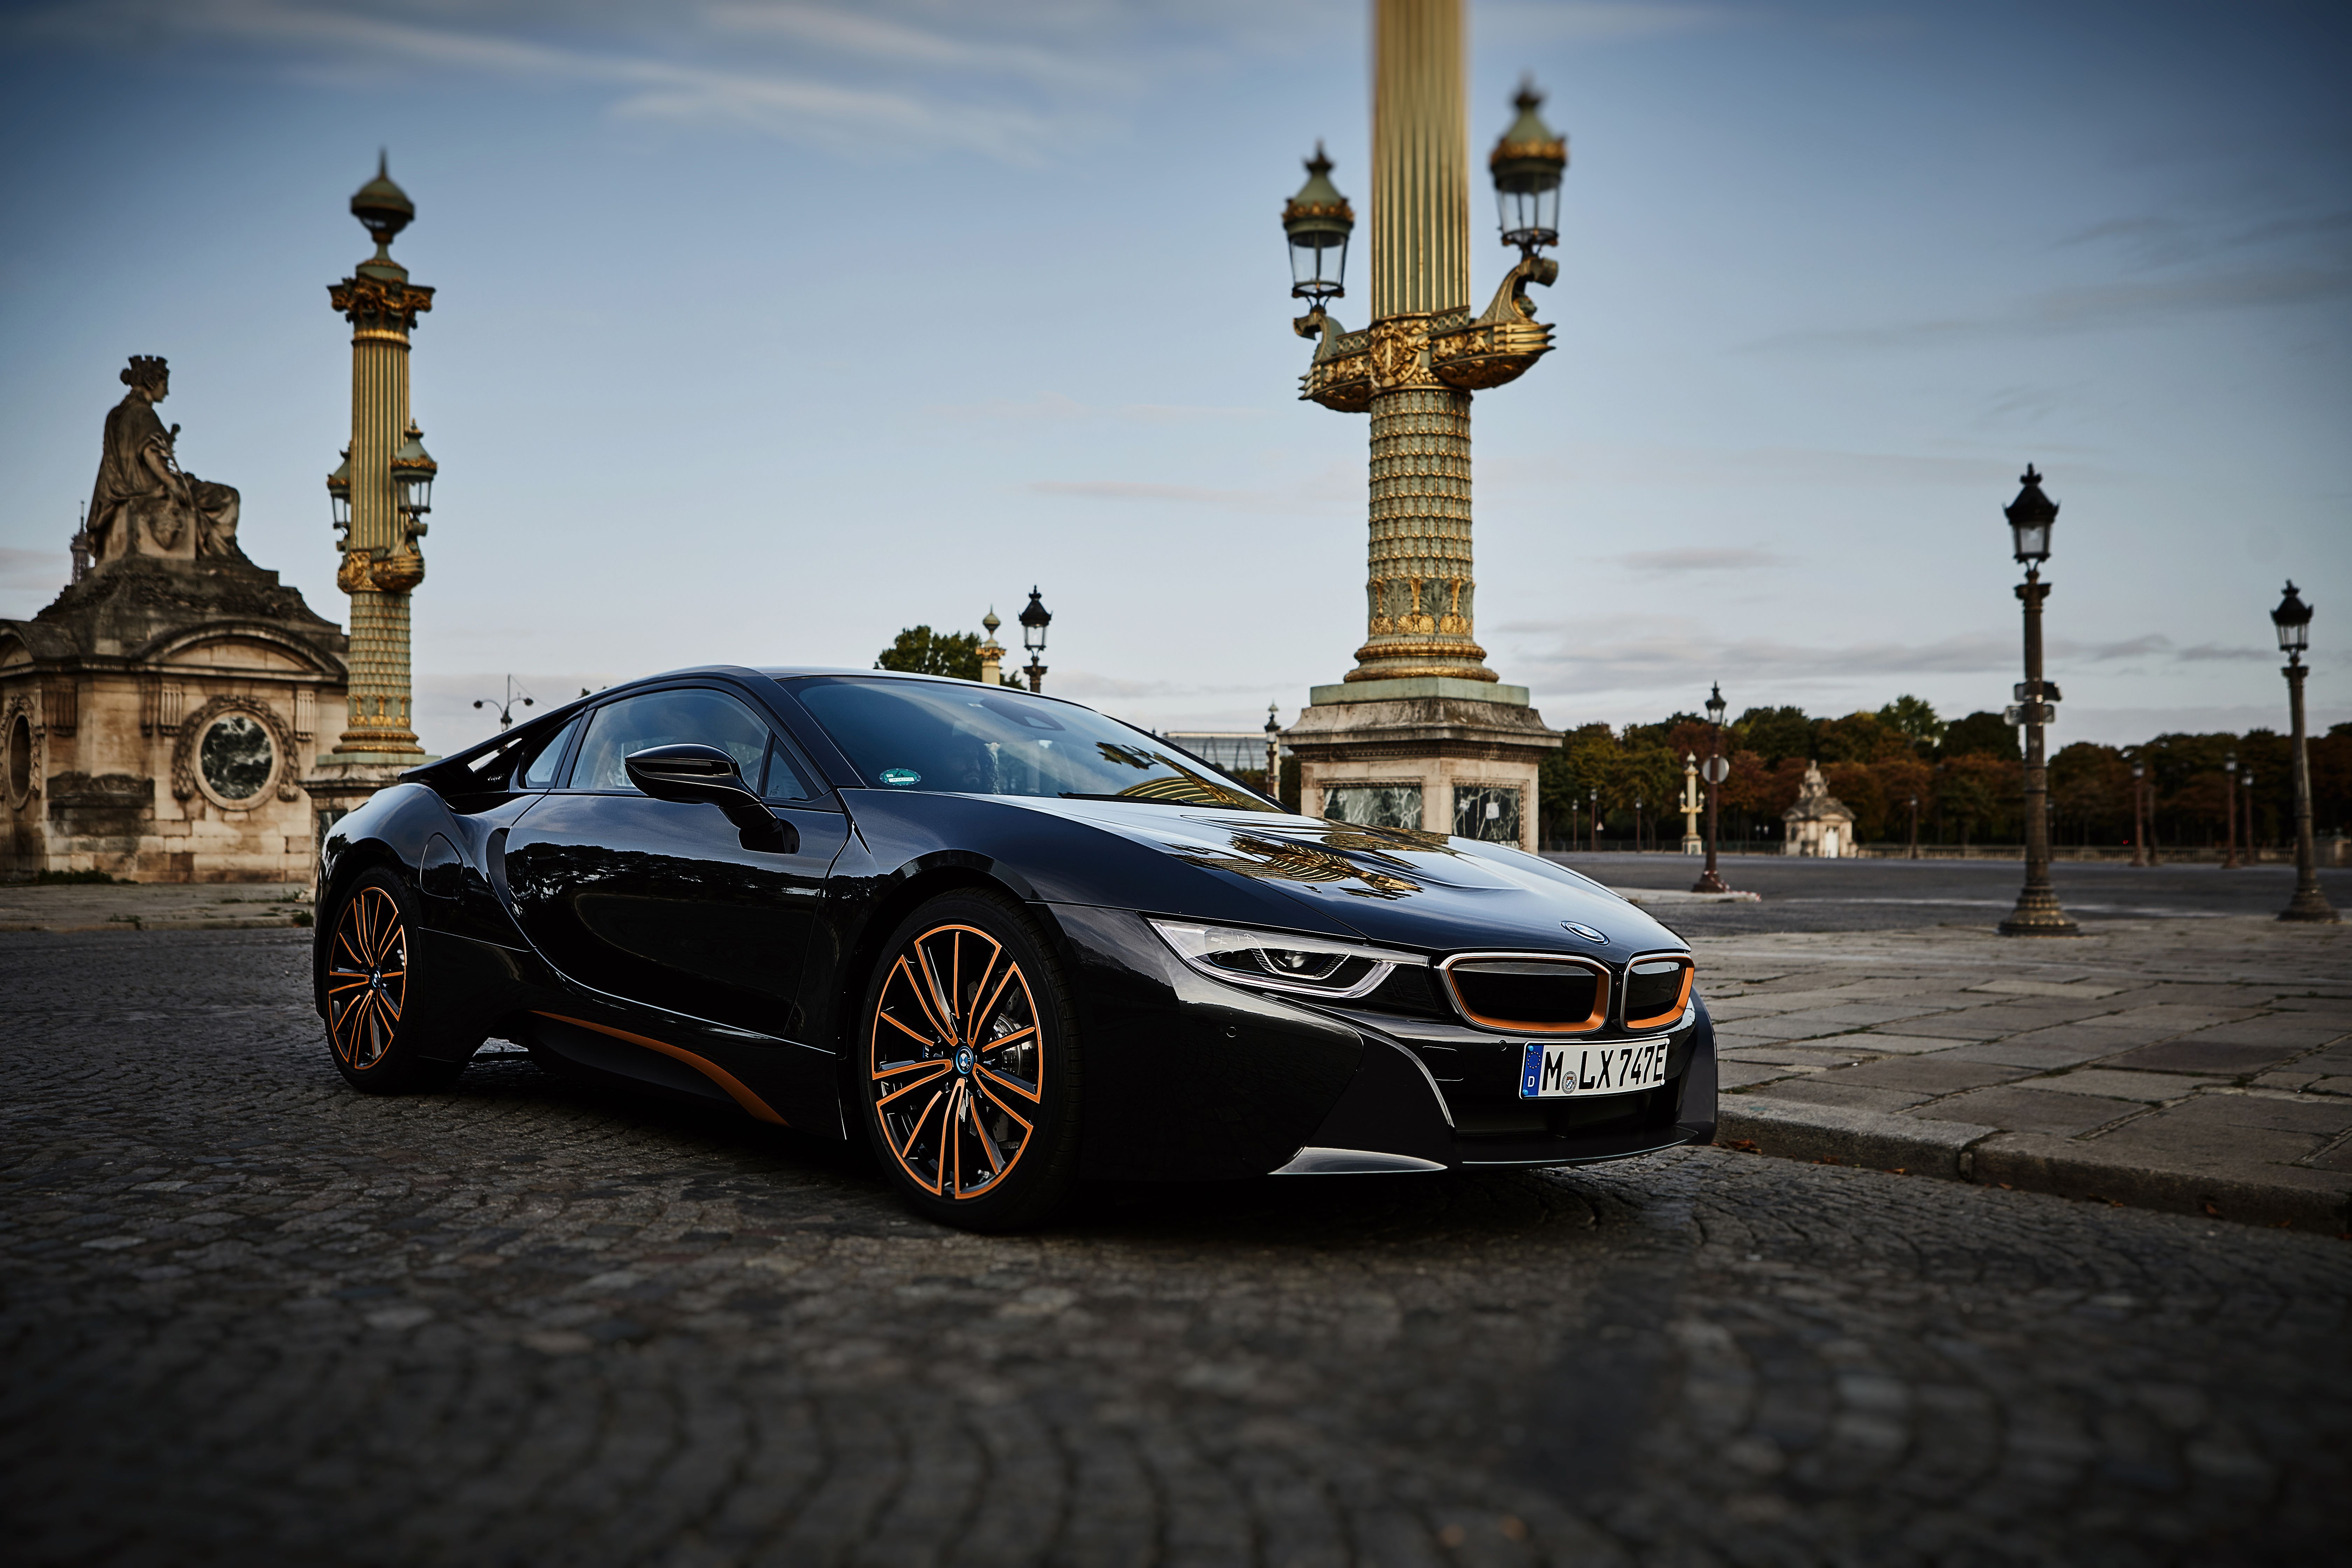 2015 BMW i8 Price, Value, Ratings & Reviews